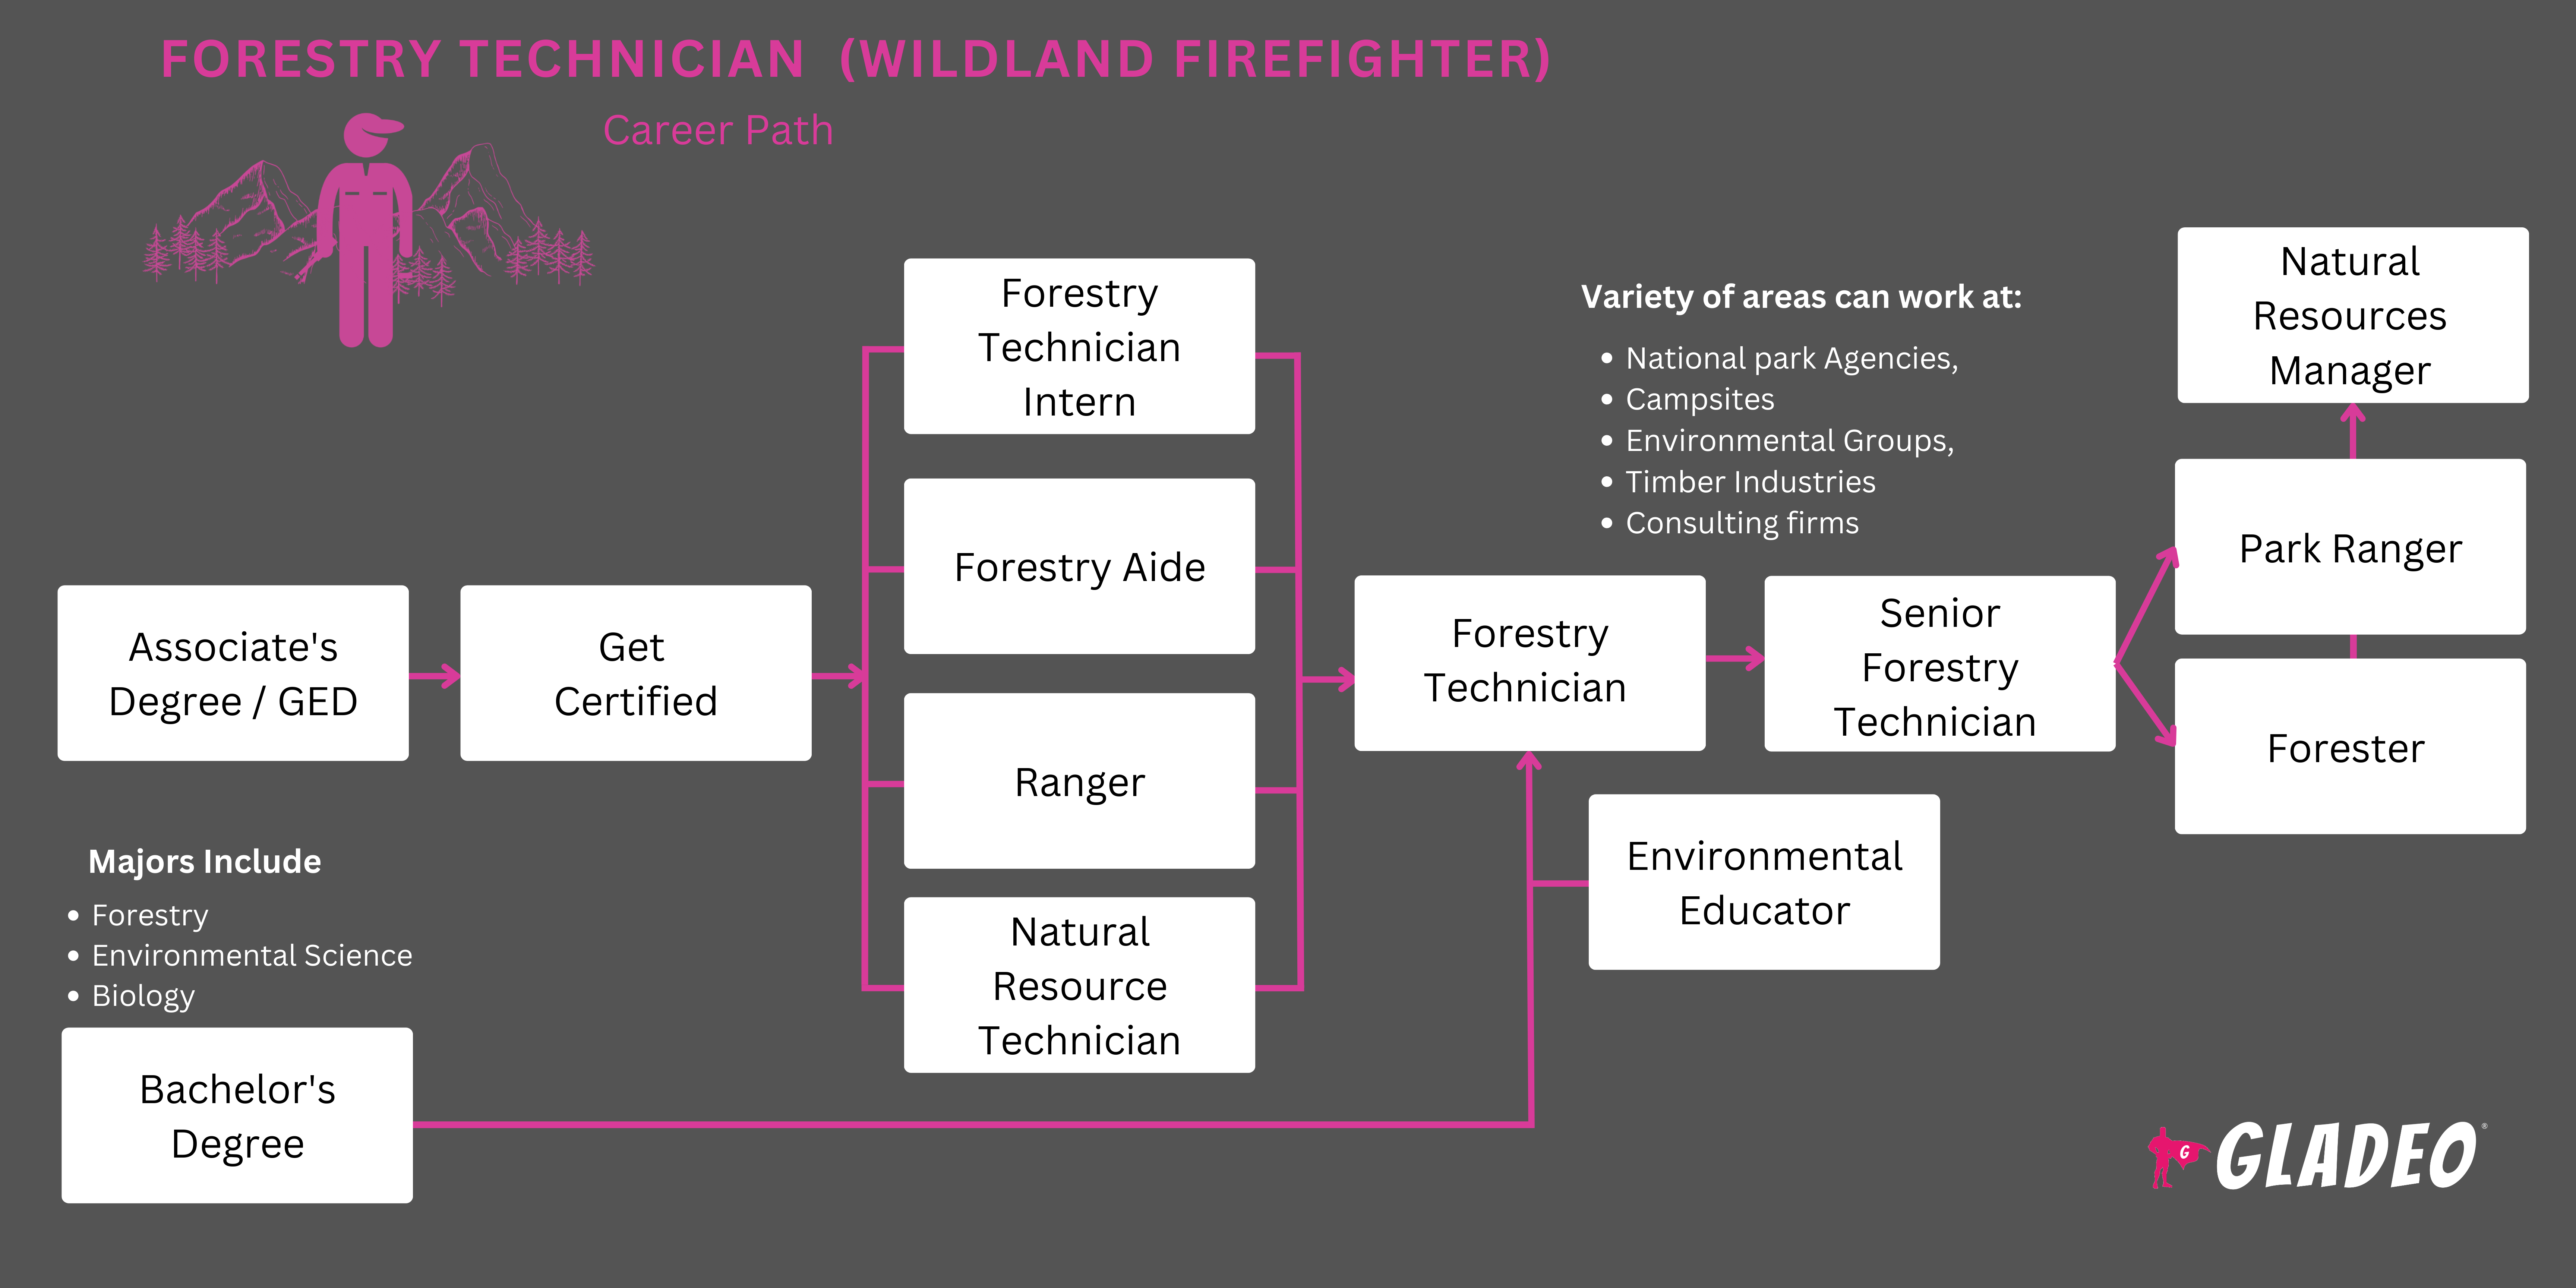 Roadmap ng Forestry Techncian (Wildland Firefighter).